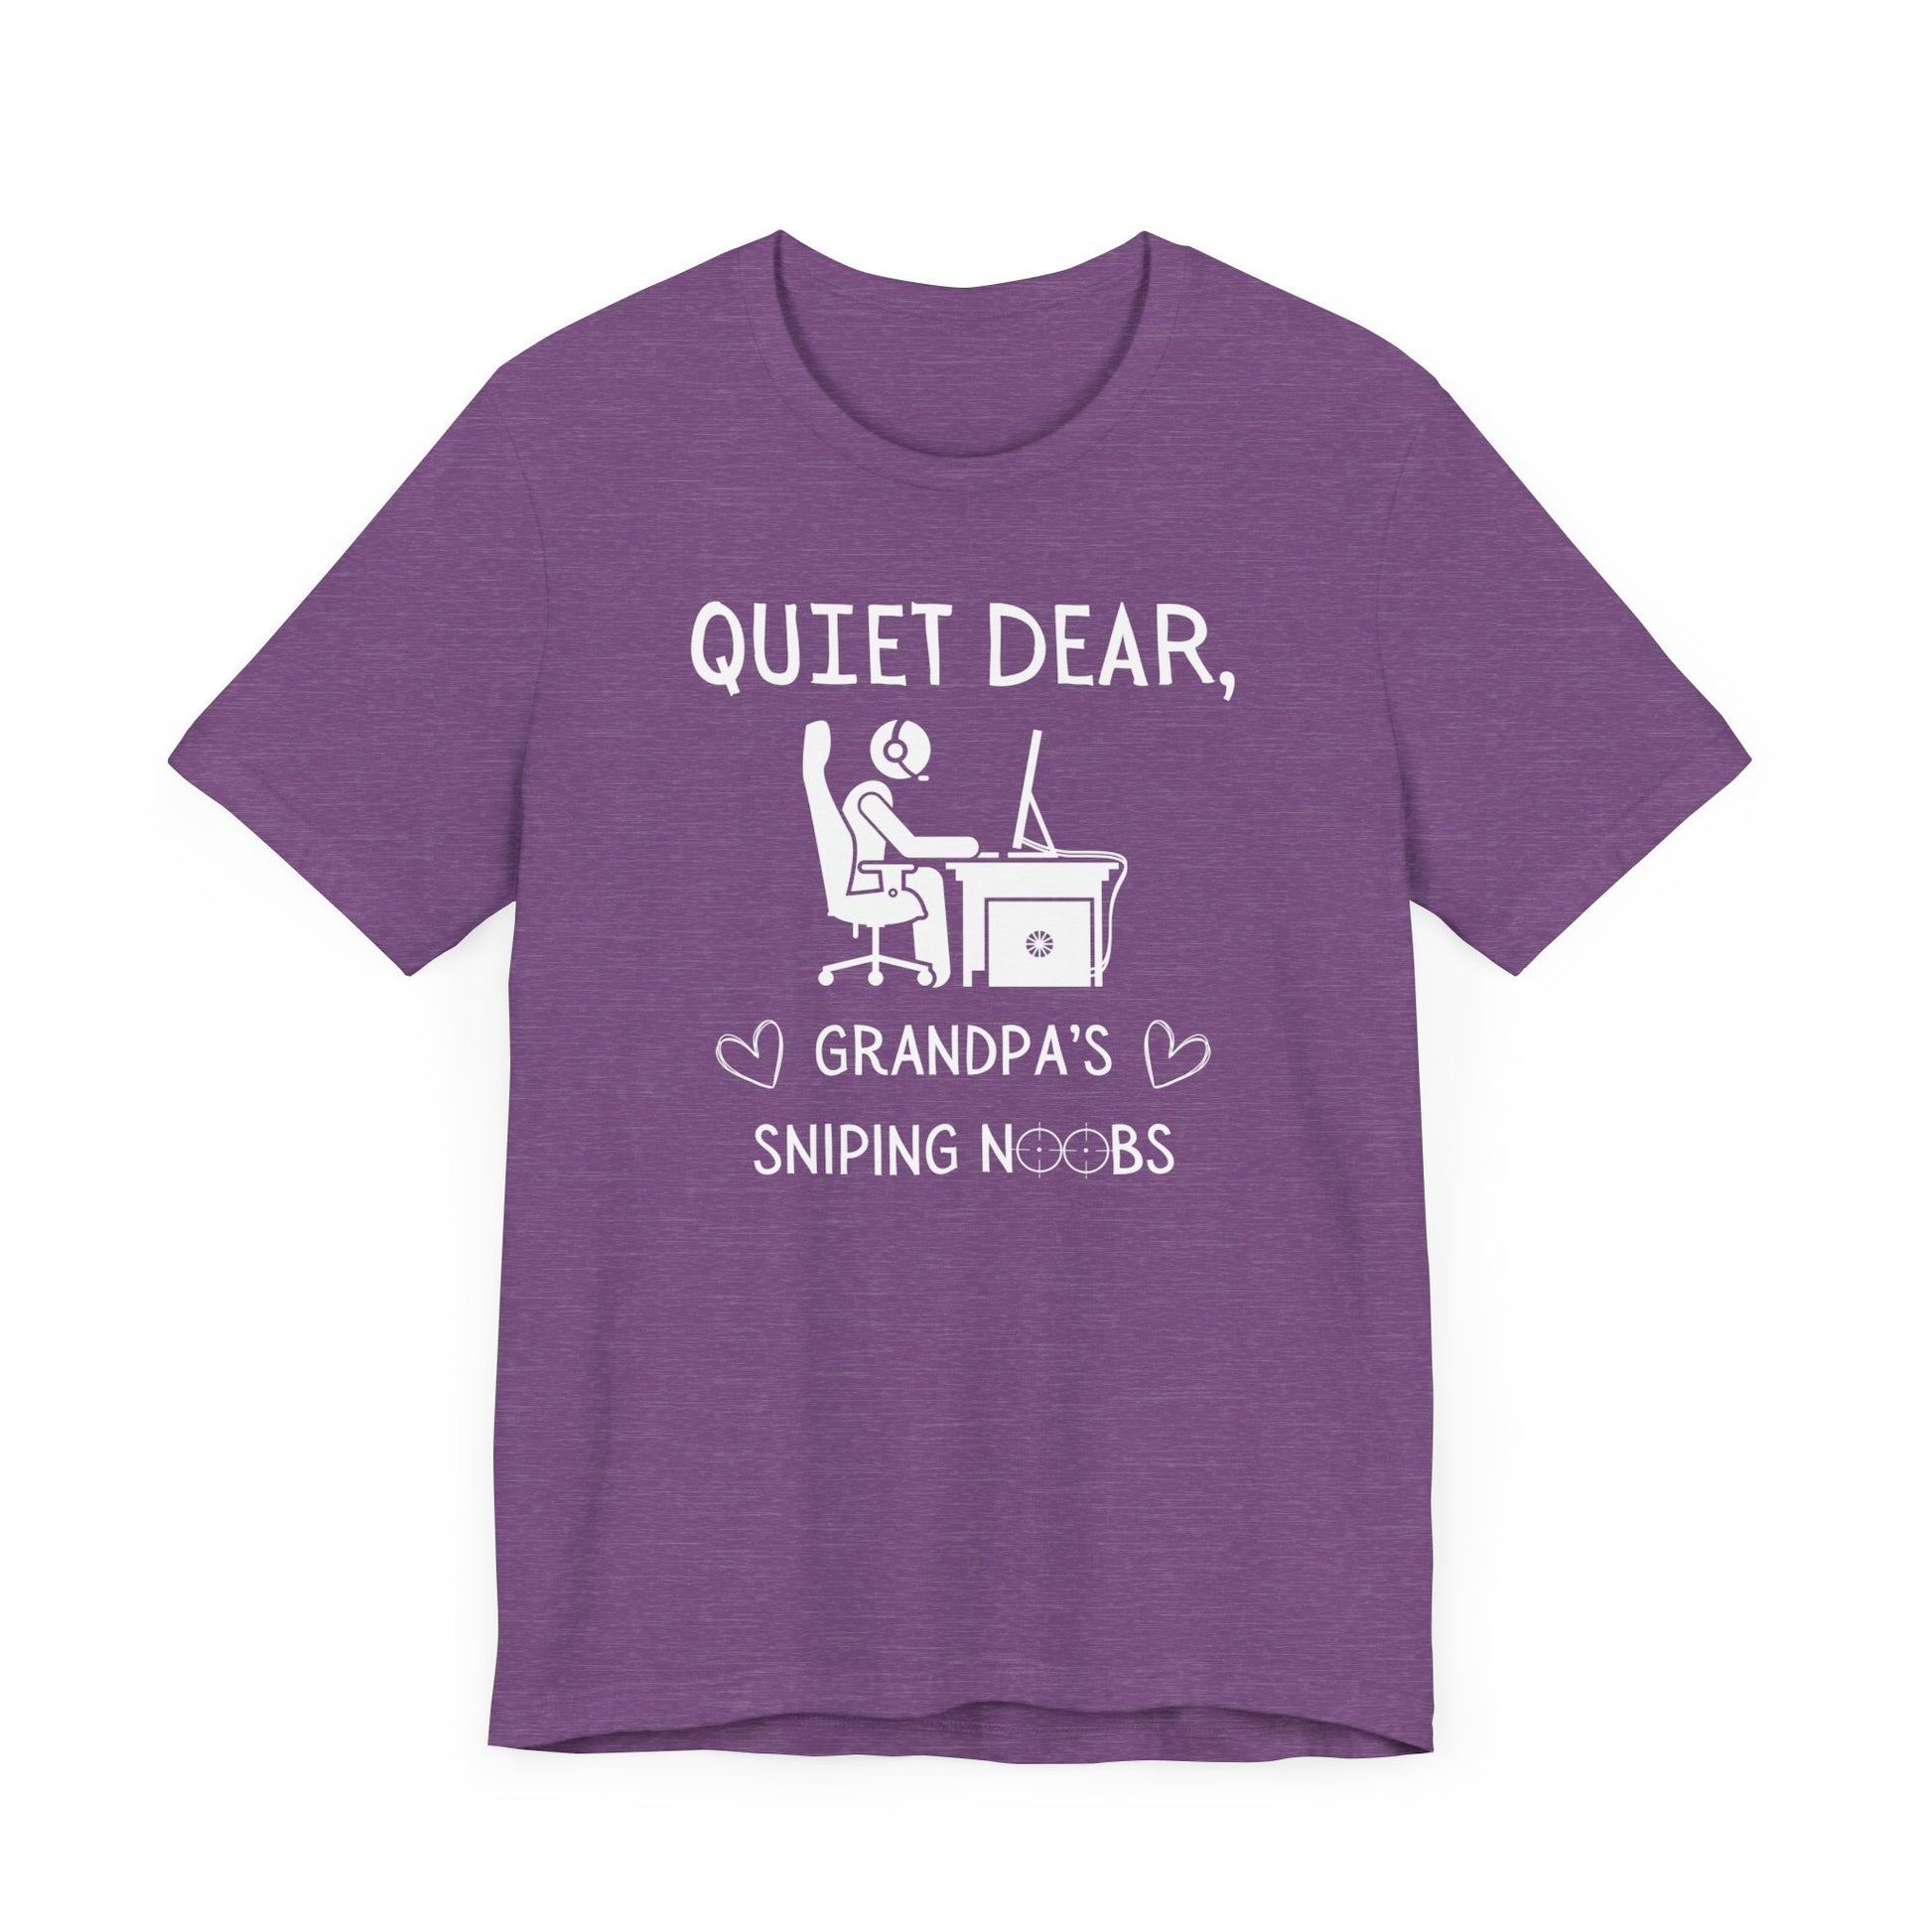 A flat image of a purple heather t-shirt that reads Quiet Dear, Grandpa's Sniping Noobs in white text. The lower text is framed by two hearts, and the O's are in the shape of sniper scopes. In the center of the shirt is an image of a person at a desk with a gaming PC.